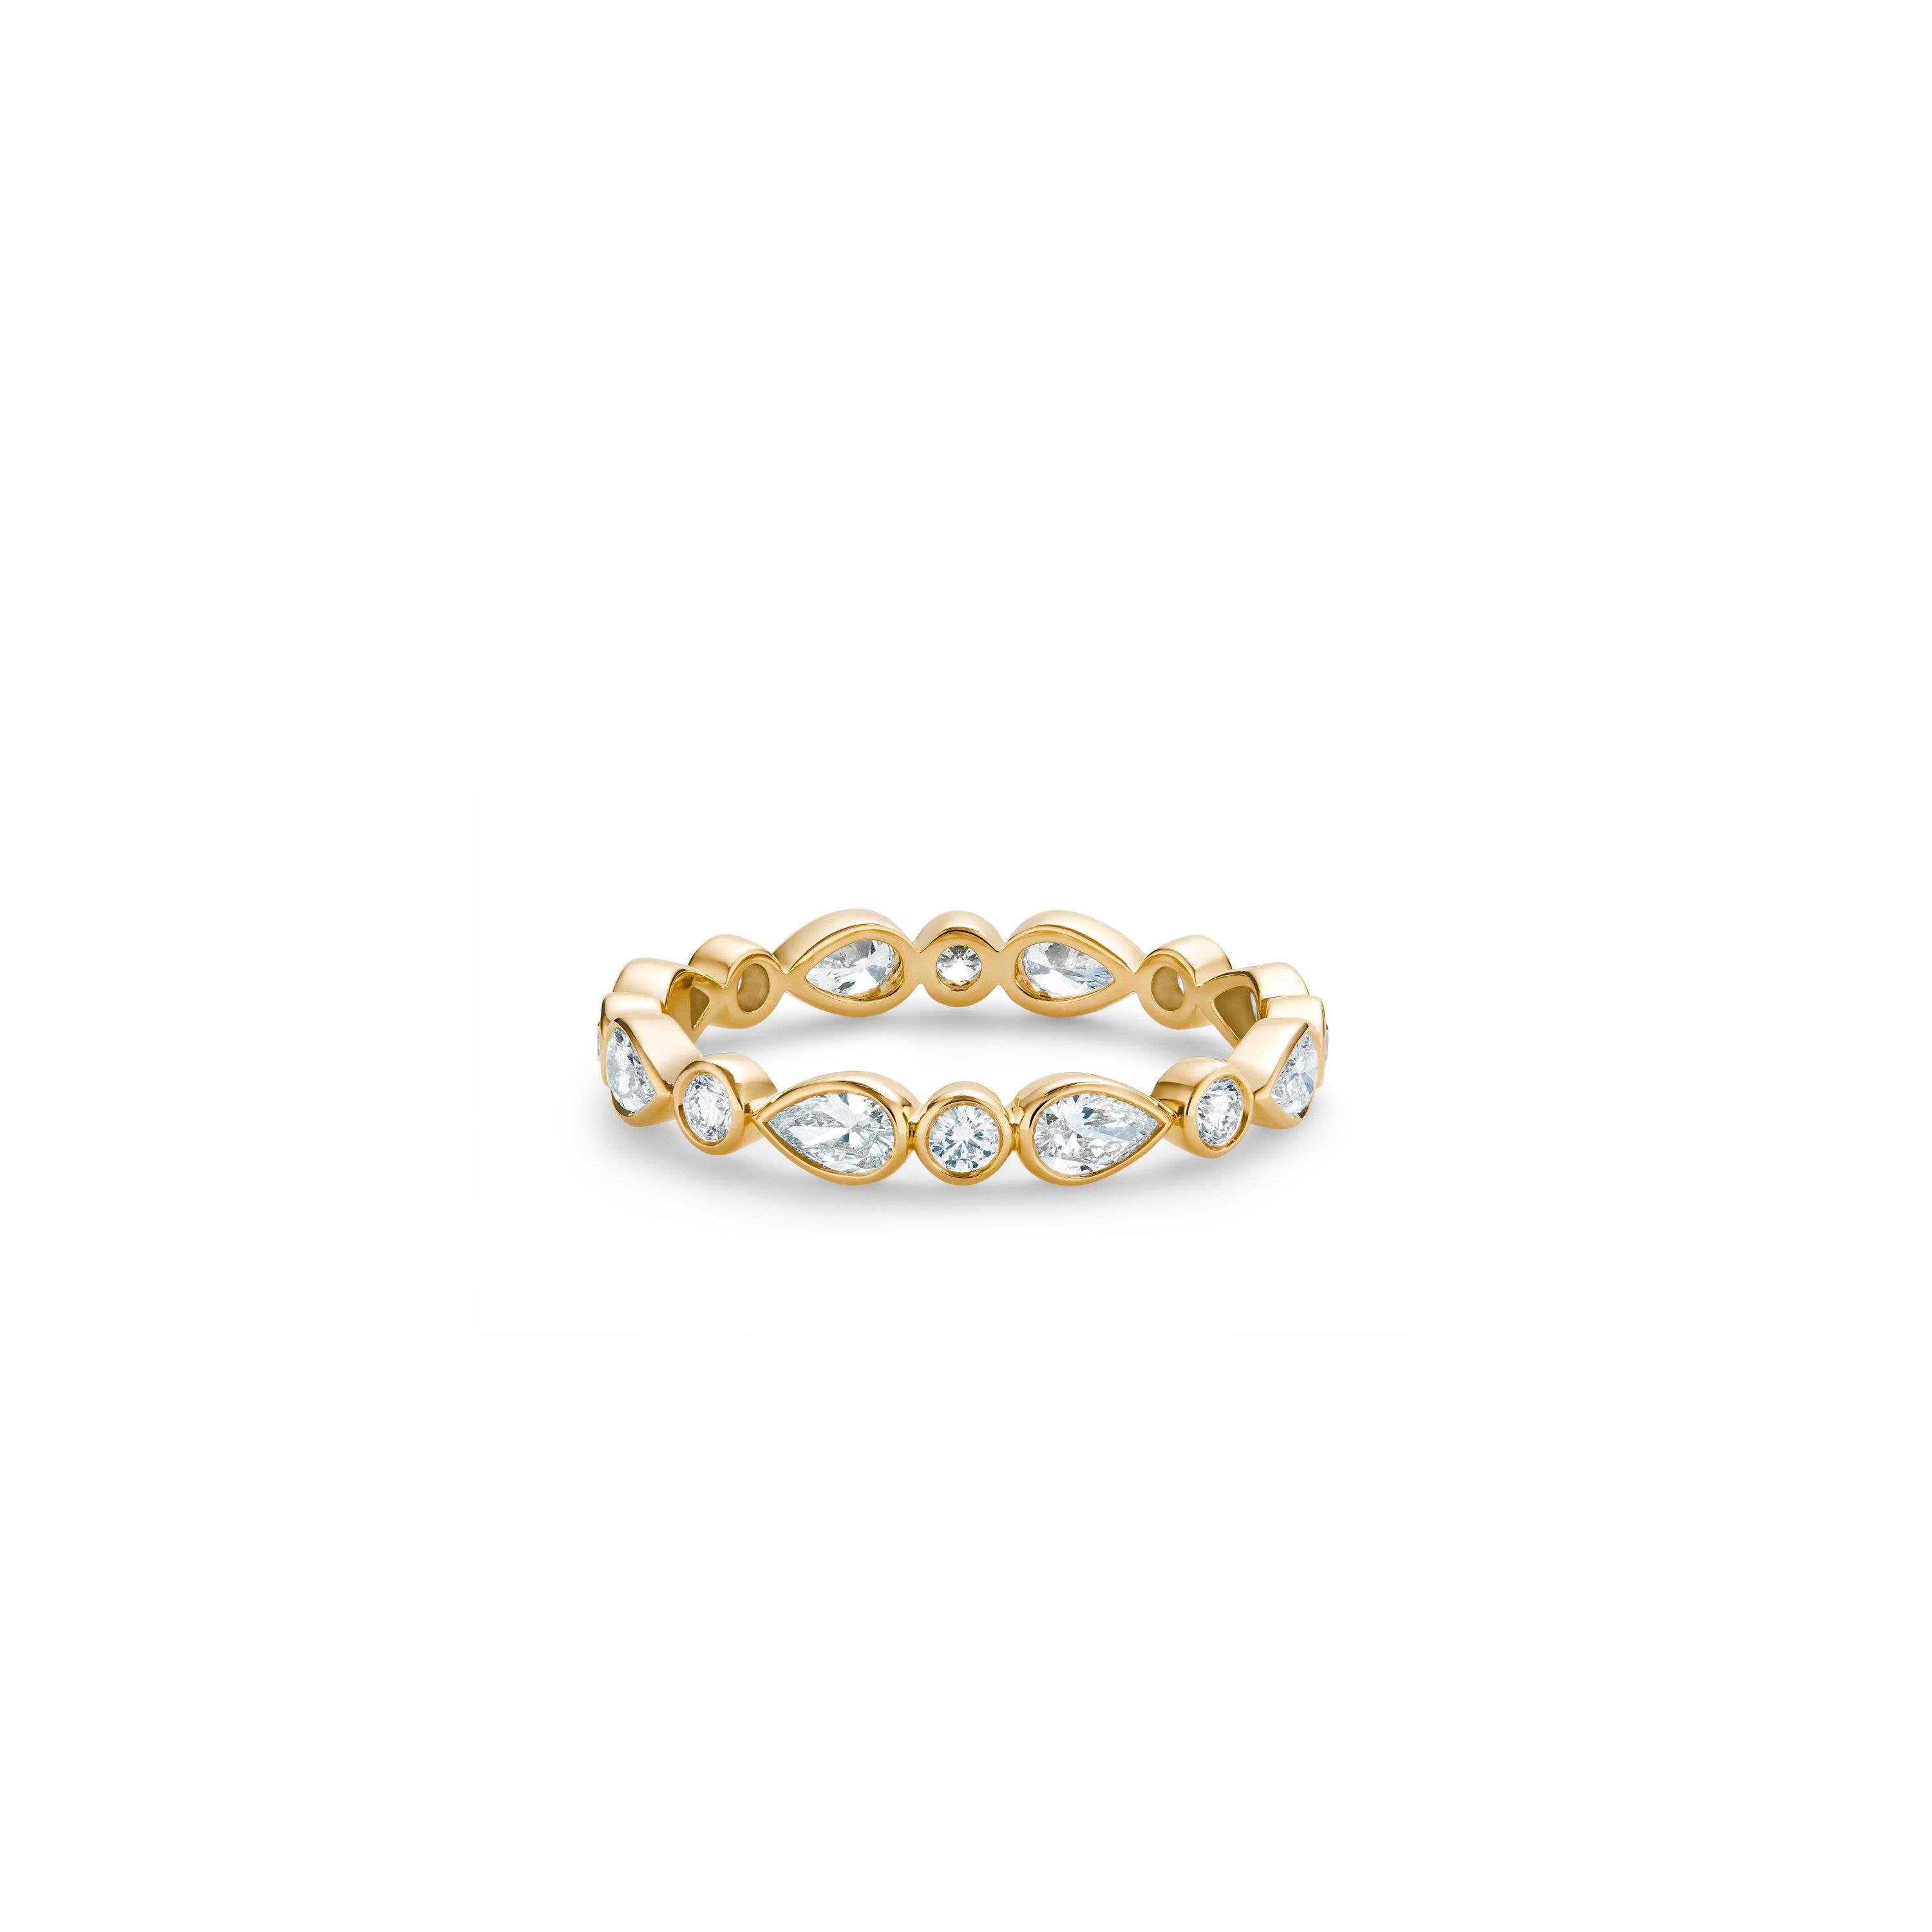 Petal band in yellow gold, image 1